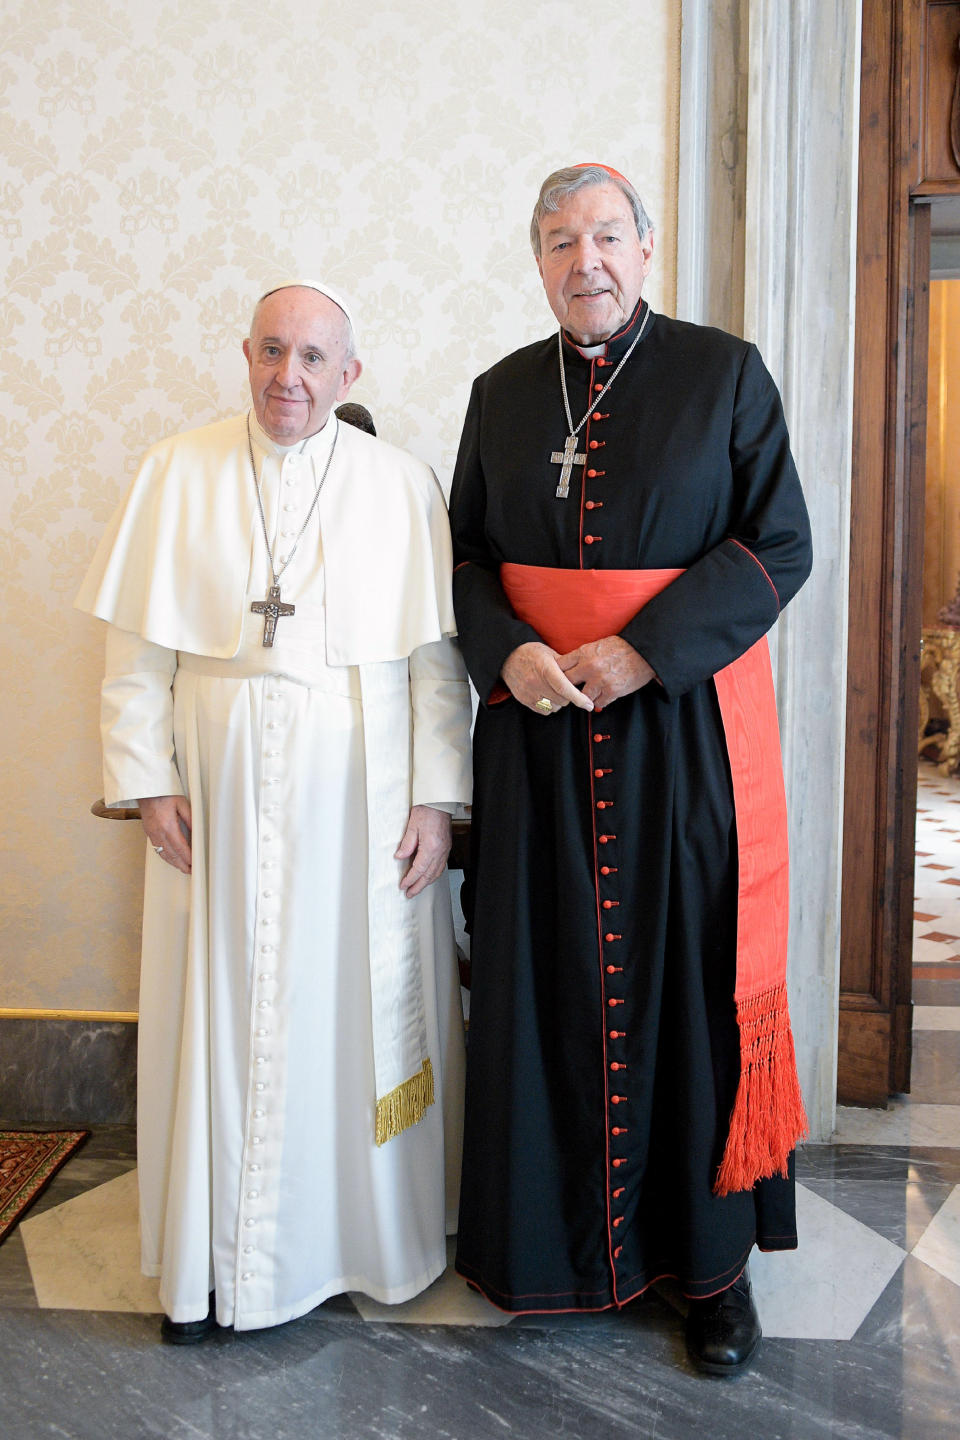 Pope Francis, left, stands next to Cardinal George Pell on the occasion of their private meeting at the Vatican, Monday, Oct. 12, 2020. The Pope warmly welcomed Cardinal for a private audience in the Apostolic Palace after the cardinal’s sex abuse conviction and acquittal in Australia. (Vatican News via AP)